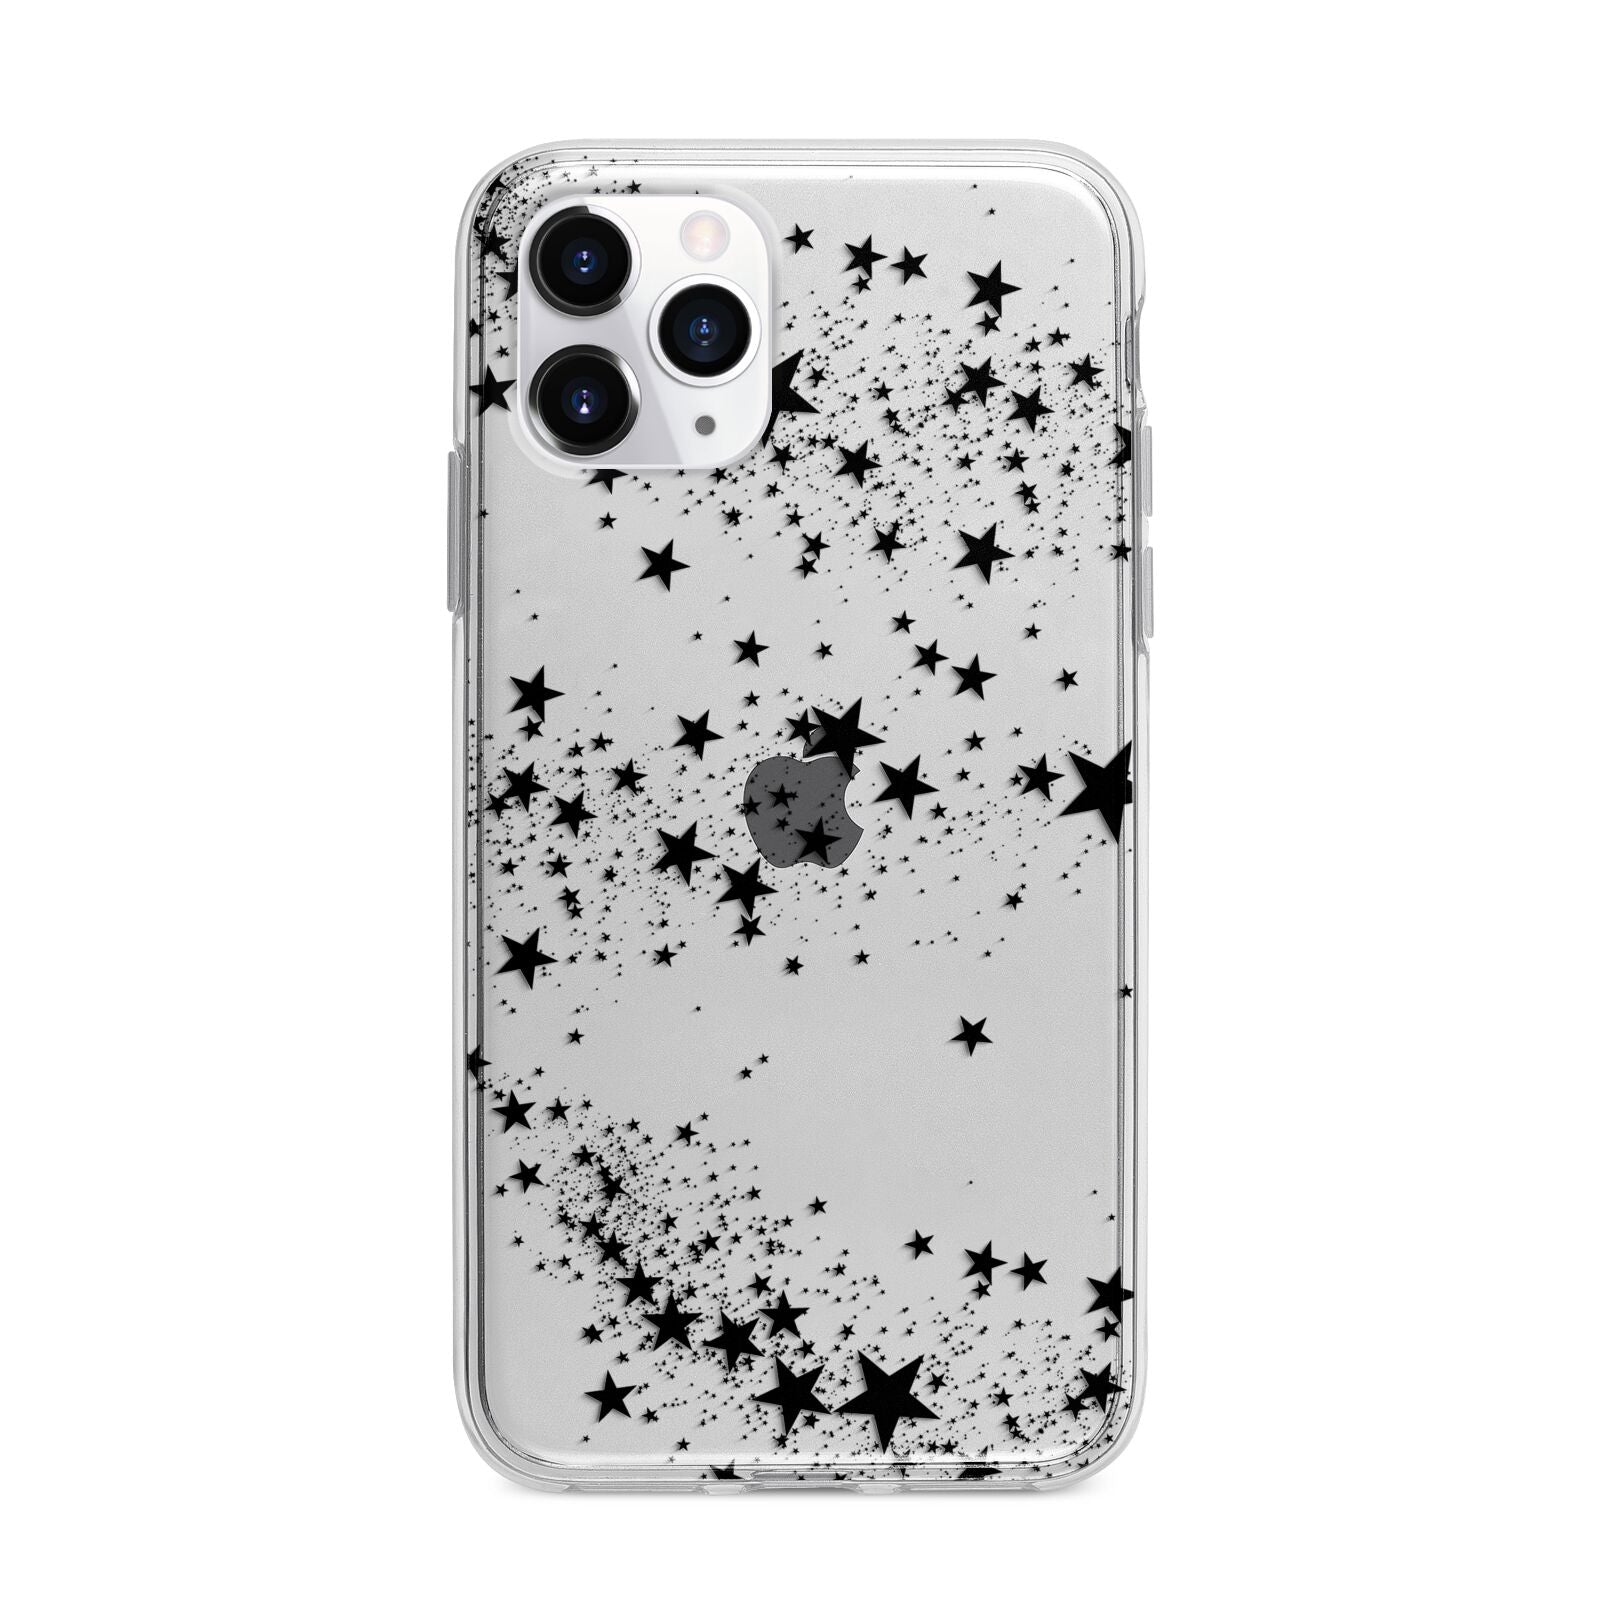 Shooting Stars Apple iPhone 11 Pro in Silver with Bumper Case